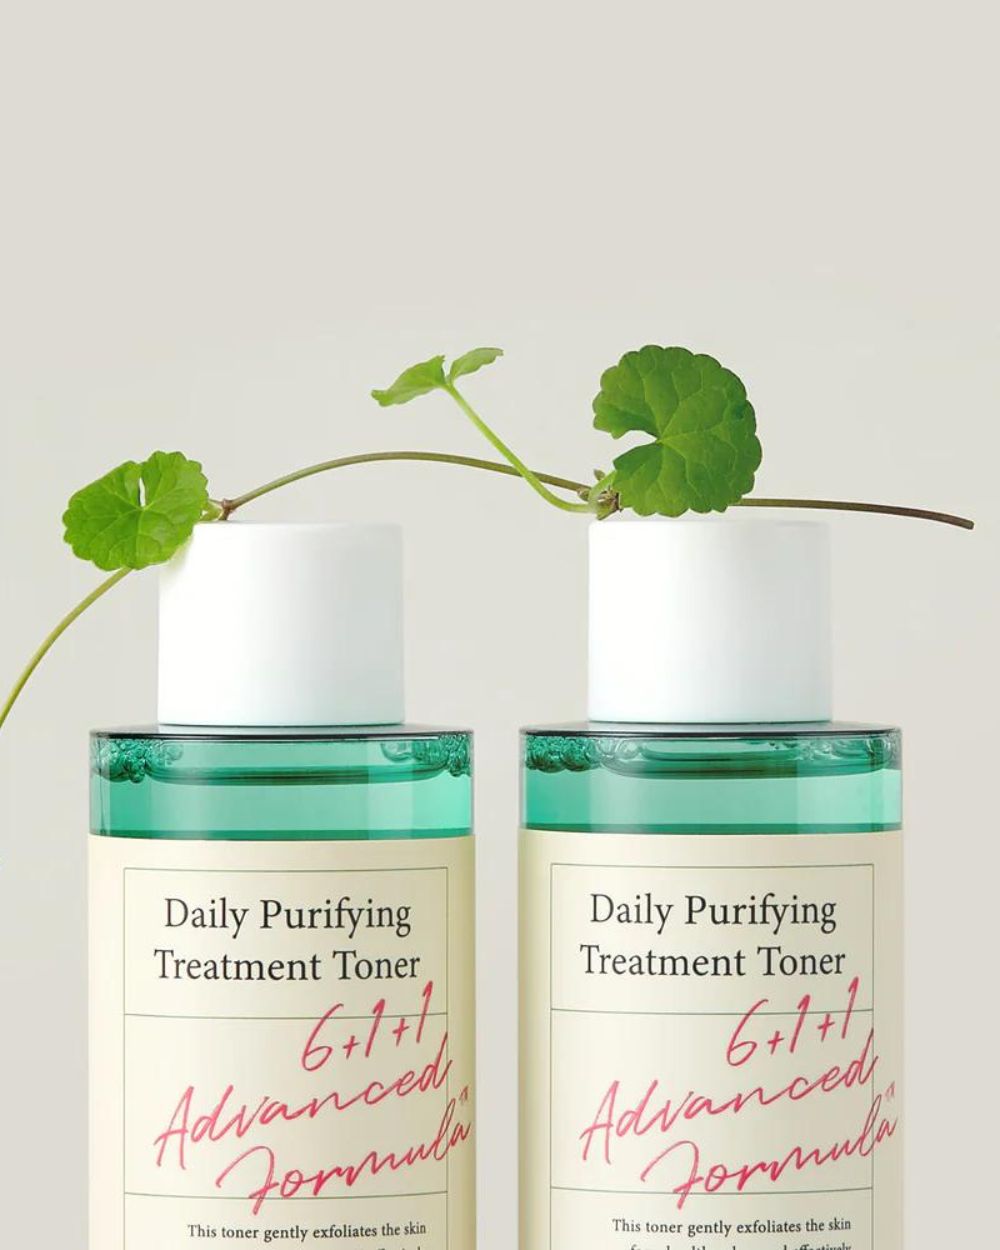 AXIS-Y - Daily Purifying Treatment Toner